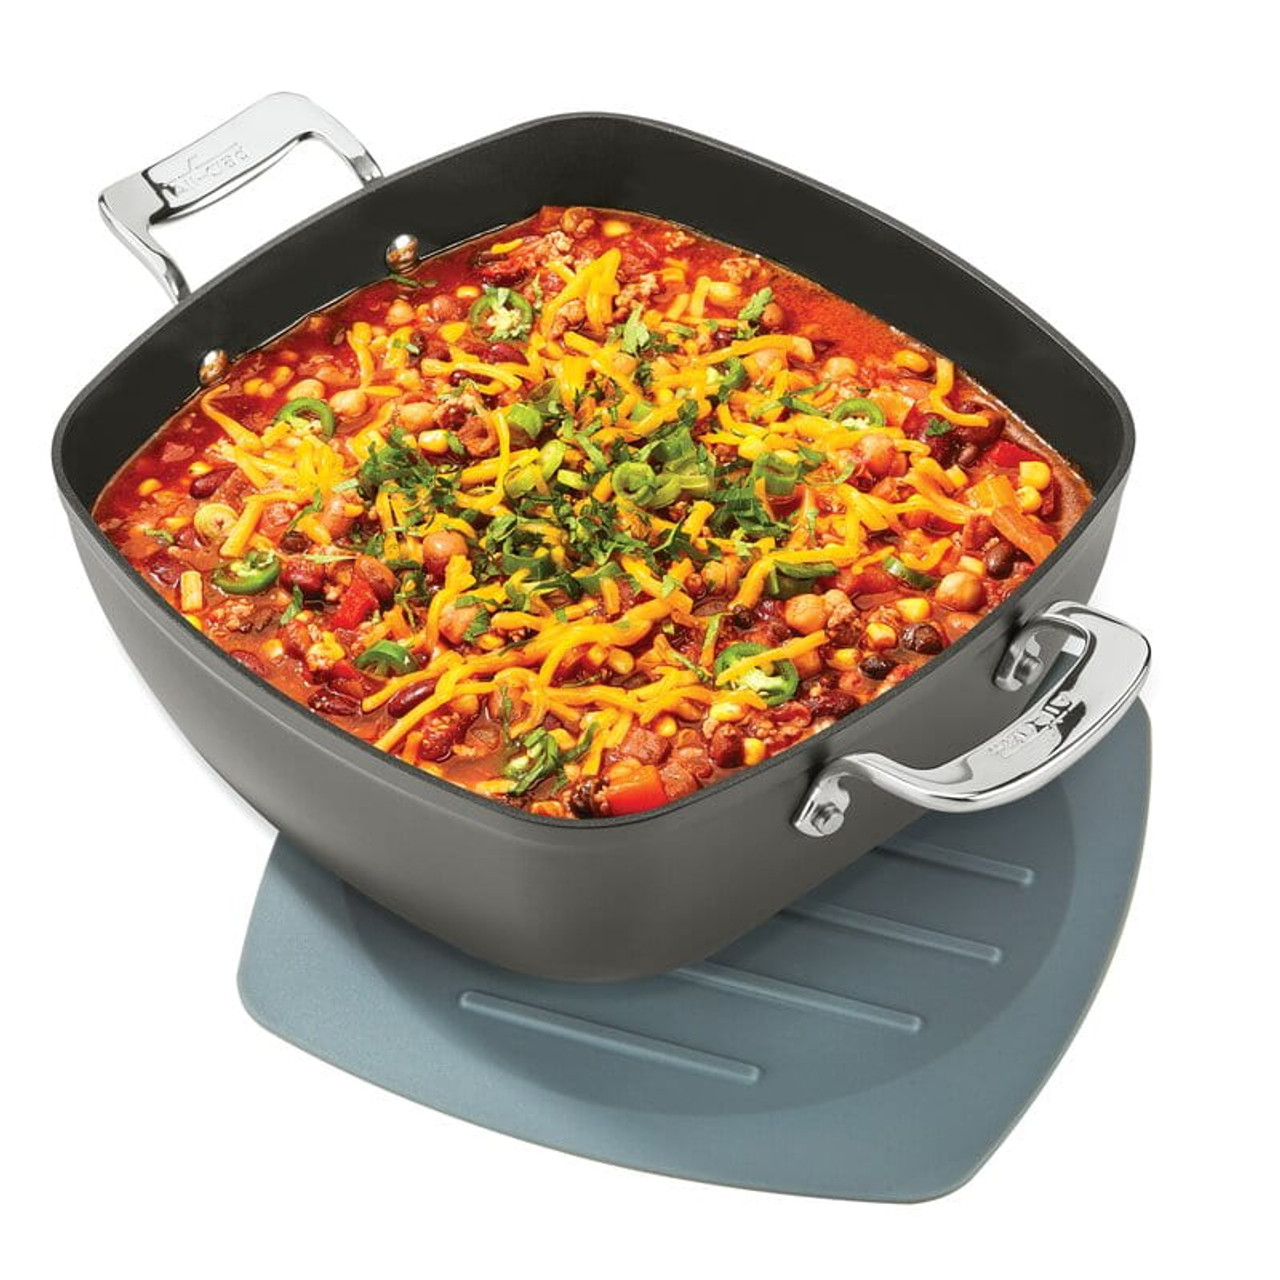 https://cdn11.bigcommerce.com/s-hccytny0od/images/stencil/1280x1280/products/3577/12765/all-clad-essentials-nonstick-simmer-stew-pan-trivet-1__57391.1601385184.jpg?c=2?imbypass=on